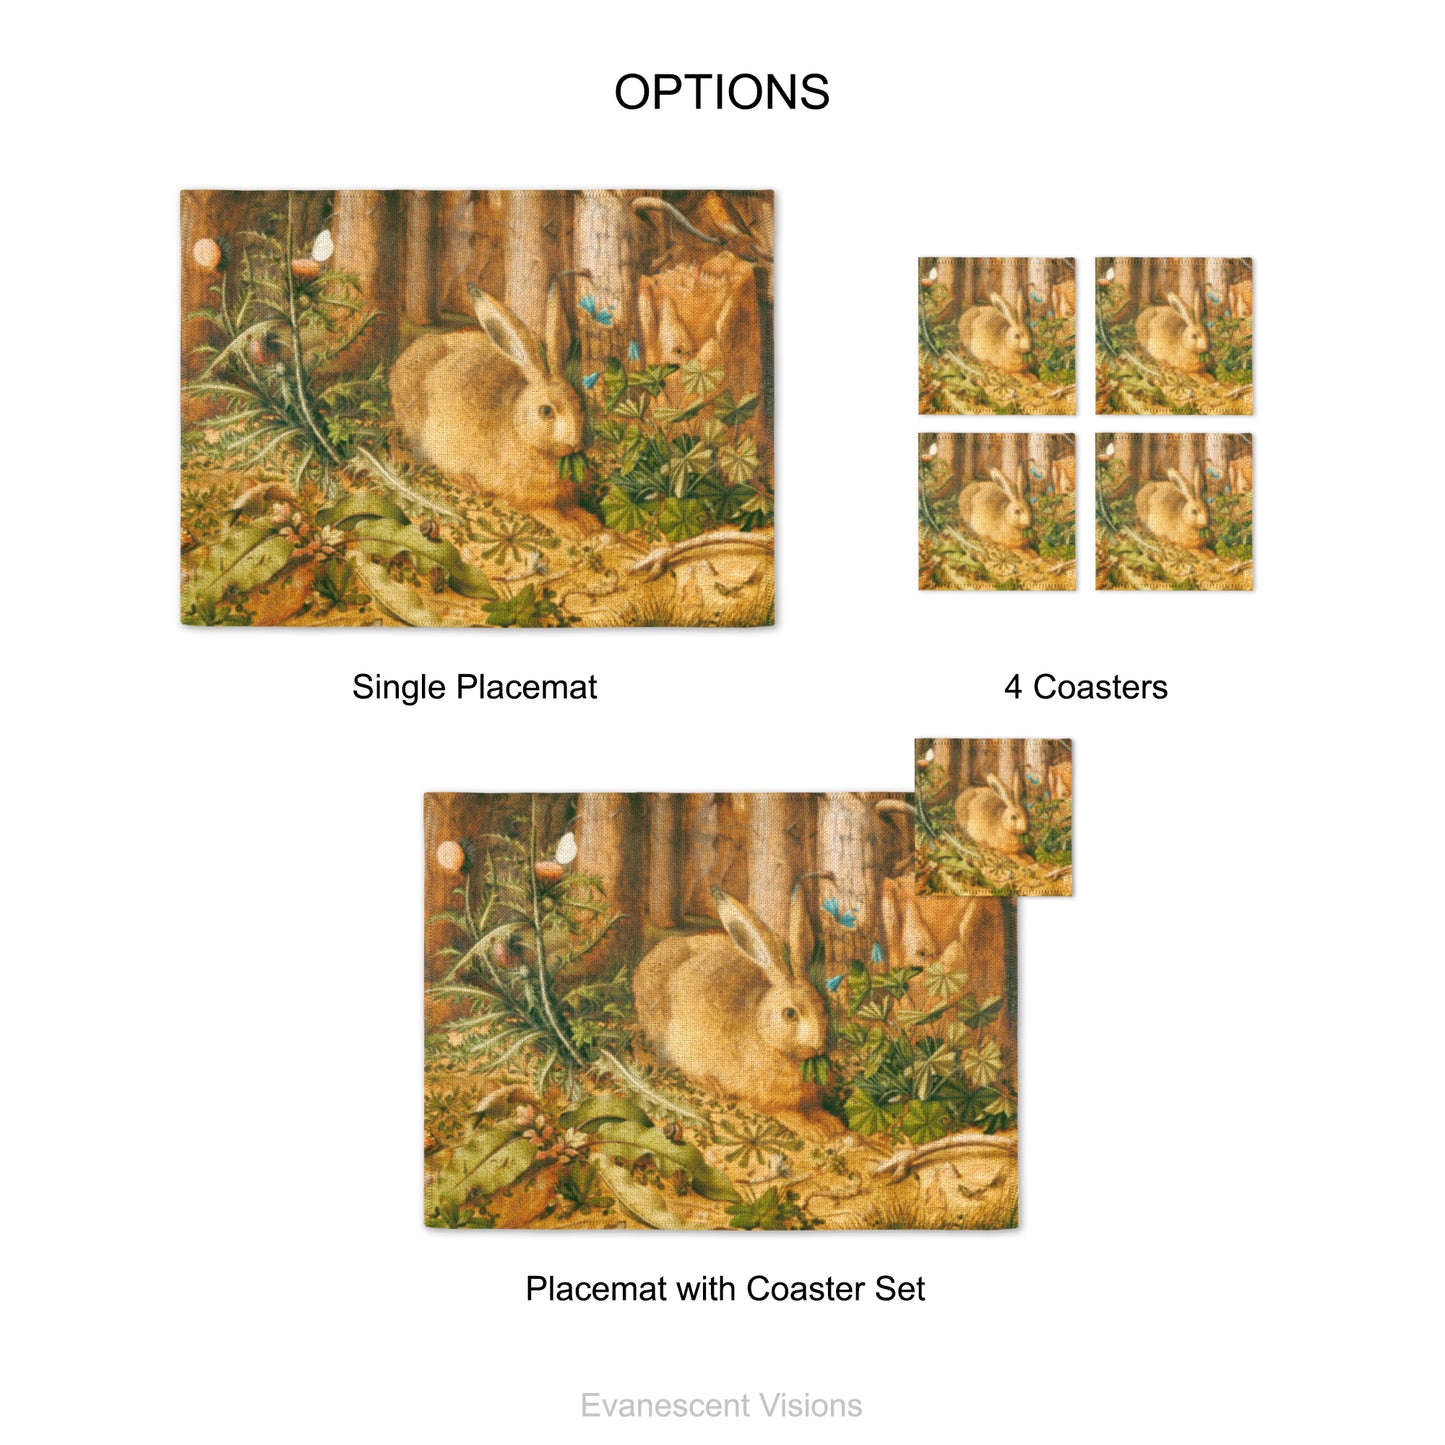 Product options shows single placemat, set of 4 coasters and placemat with coaster set. Design is 'A Hare in the forest' by Hans Hoffmann (1530-1592).